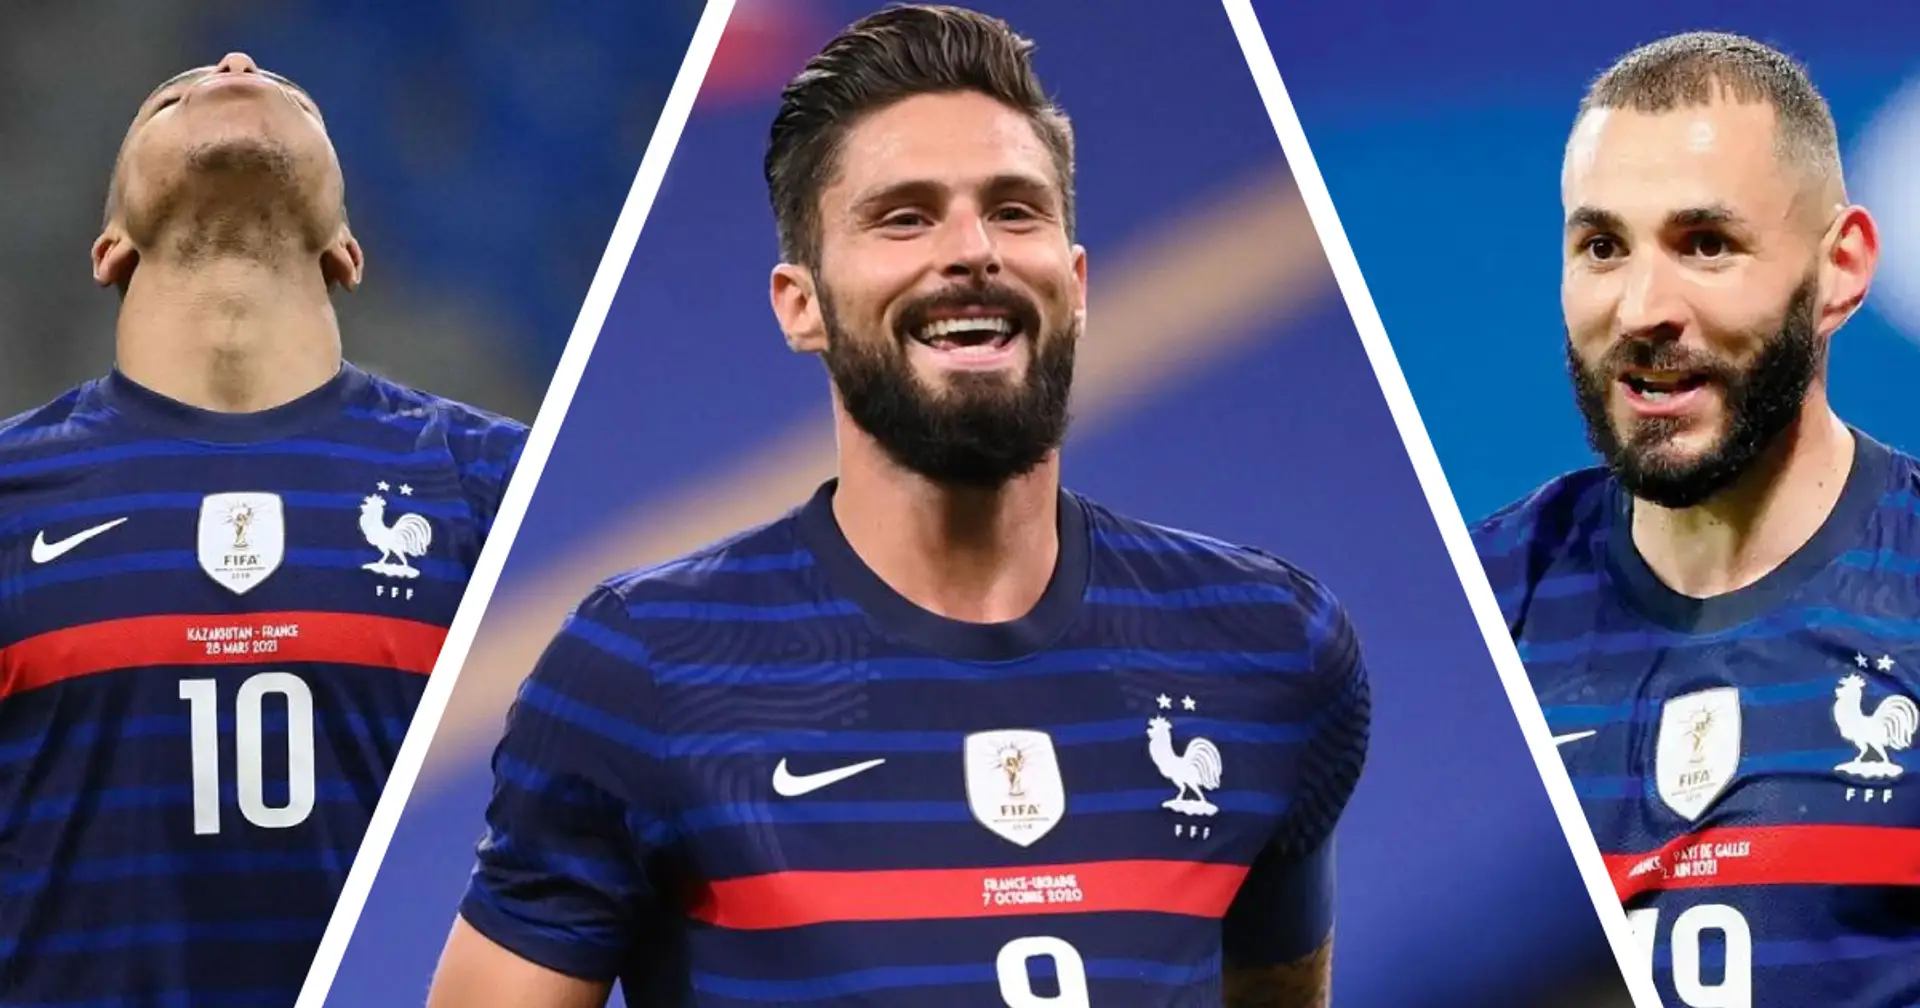 'Now he'll appreciate Giroud': Fan points out Mbappe's struggles for France without Chelsea striker